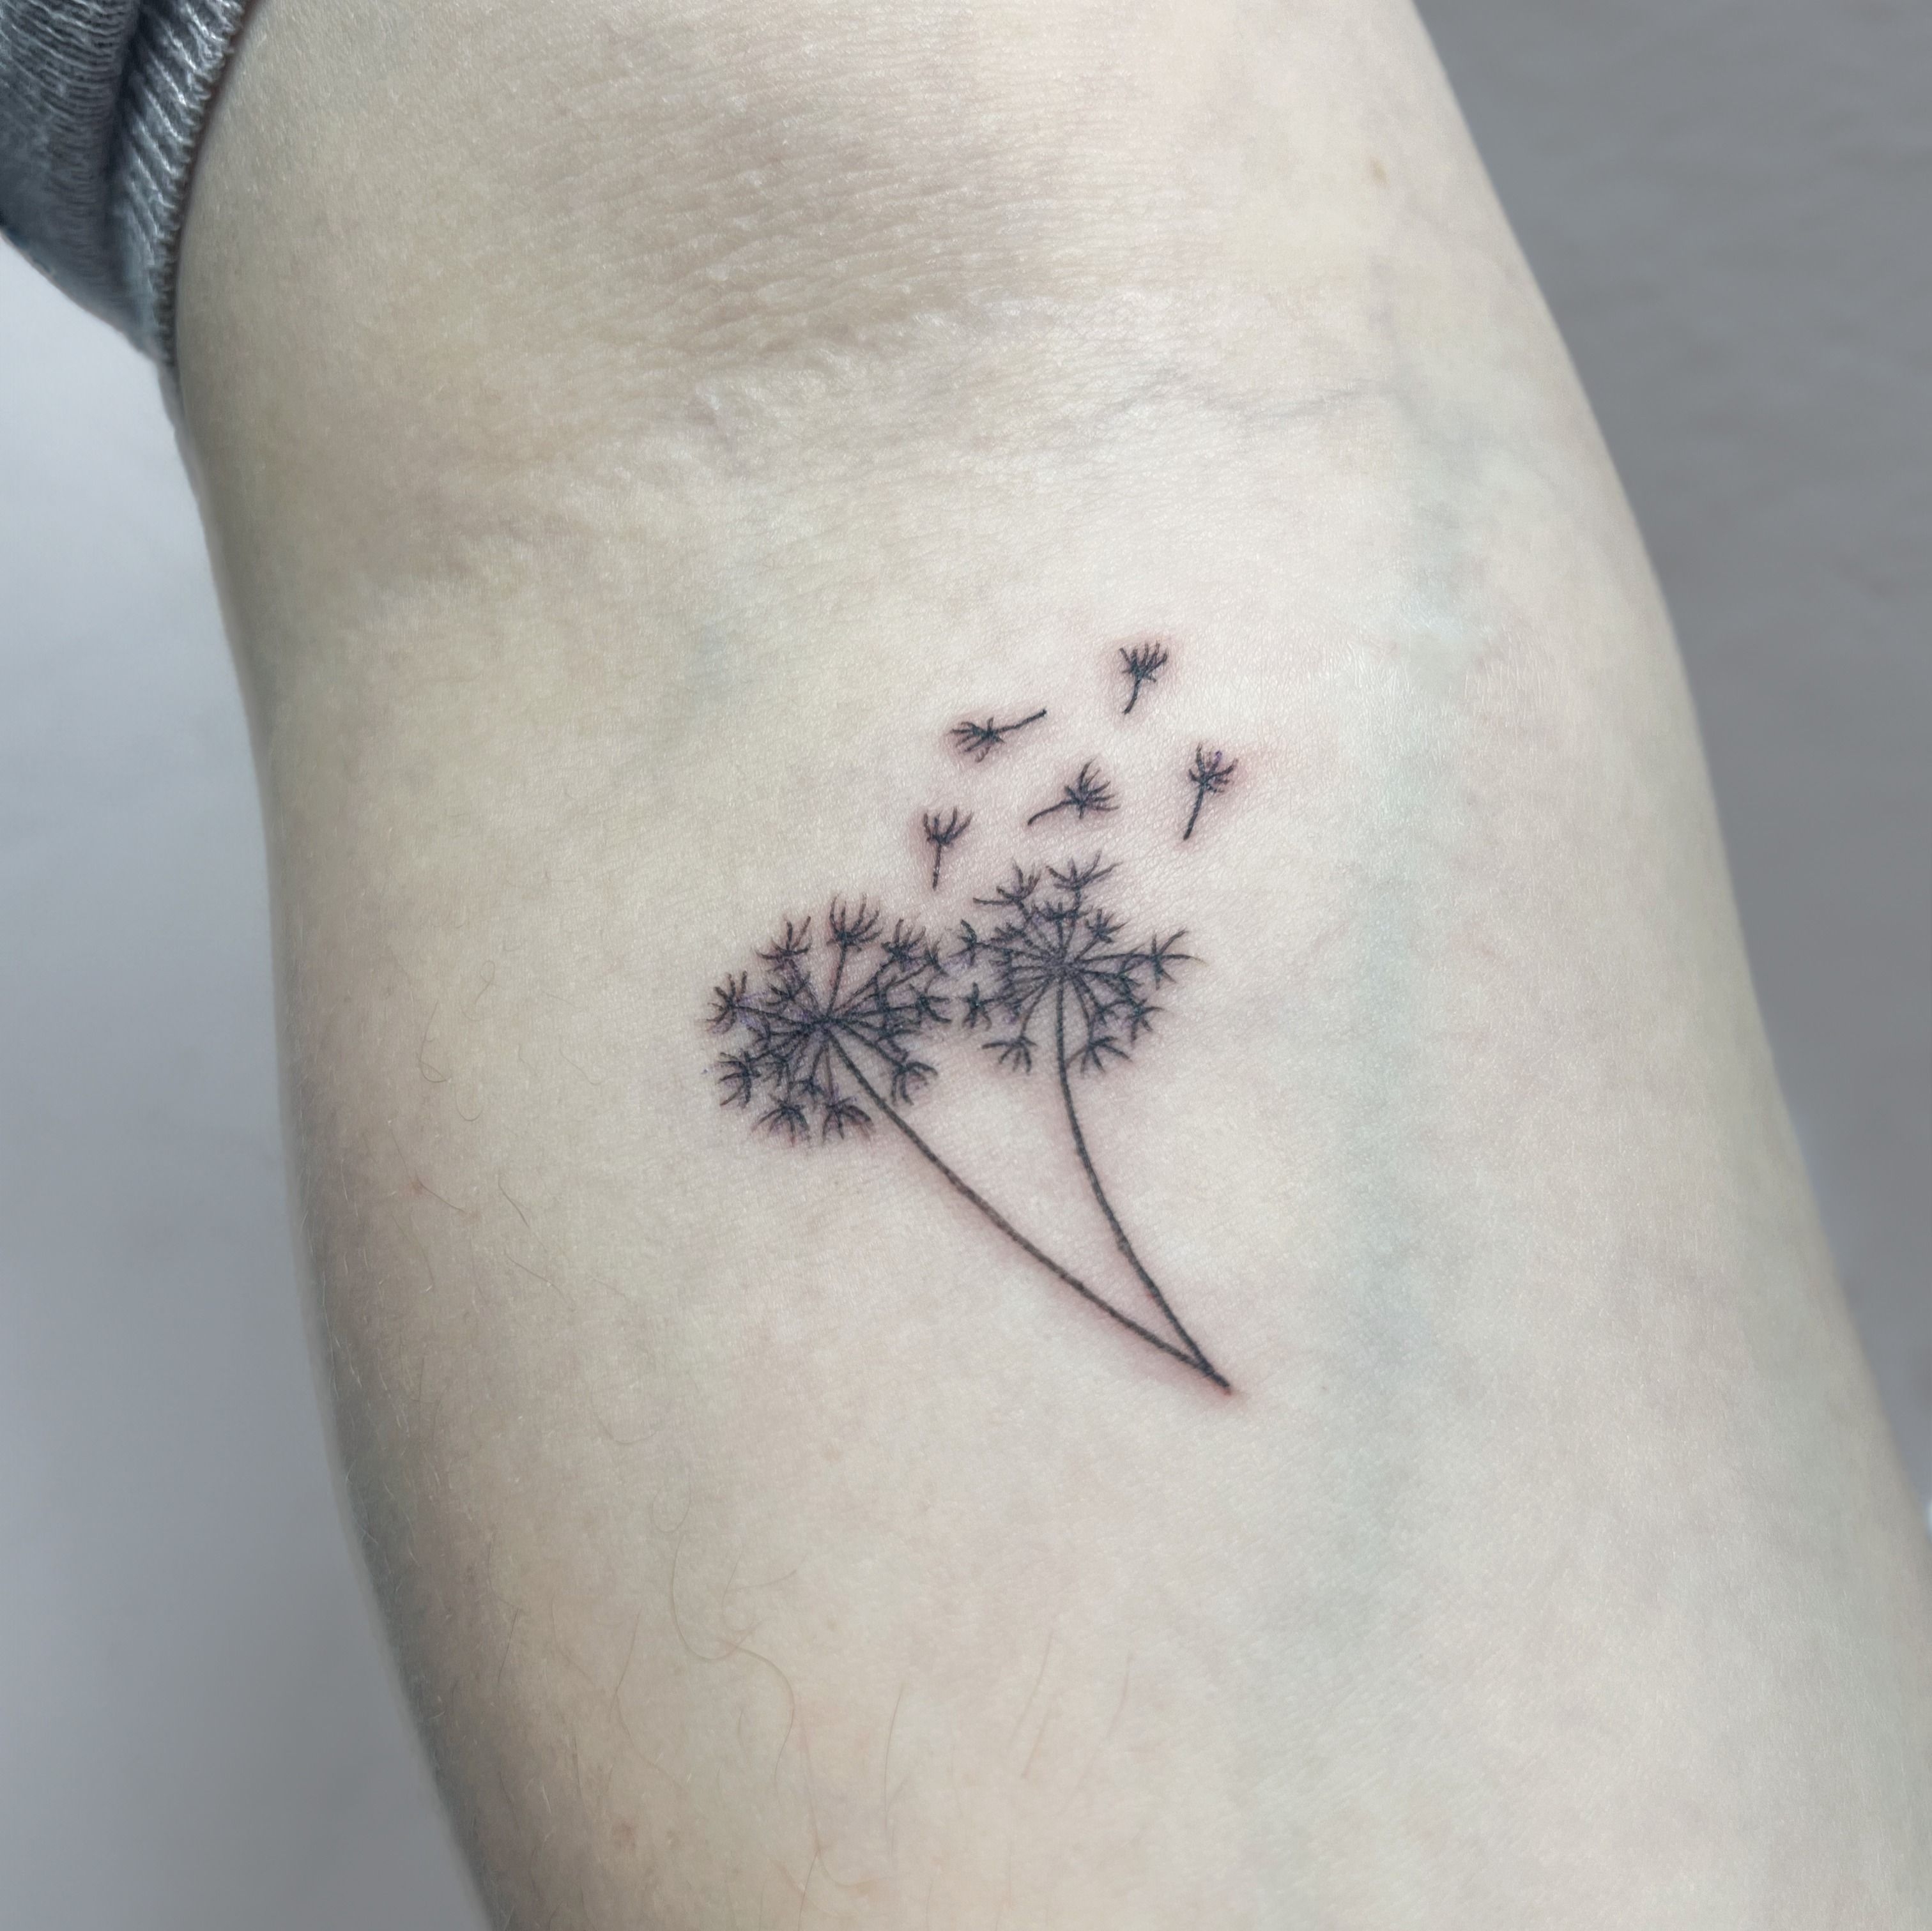 Top 10 Best Dandelion Tattoos and Meanings | Styles At Life